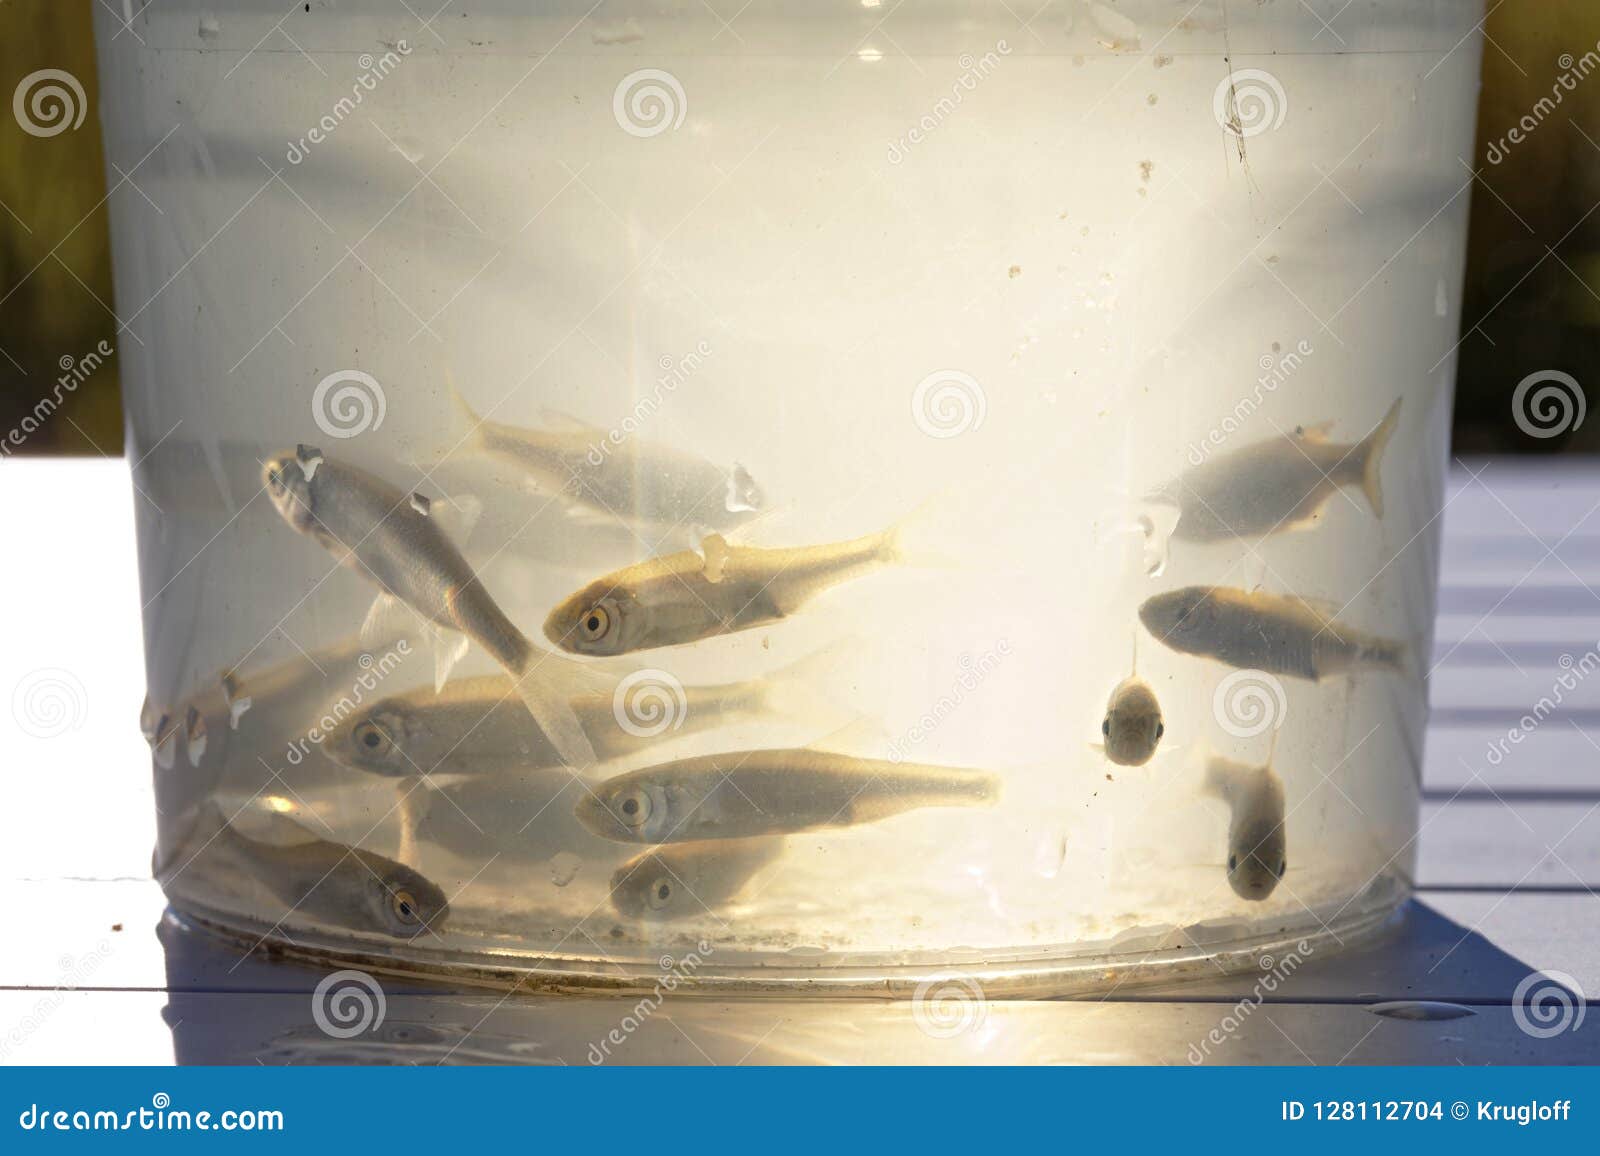 Small Live Minnows As Bait for Predatory Fish Stock Photo - Image of  aquatic, alive: 128112704